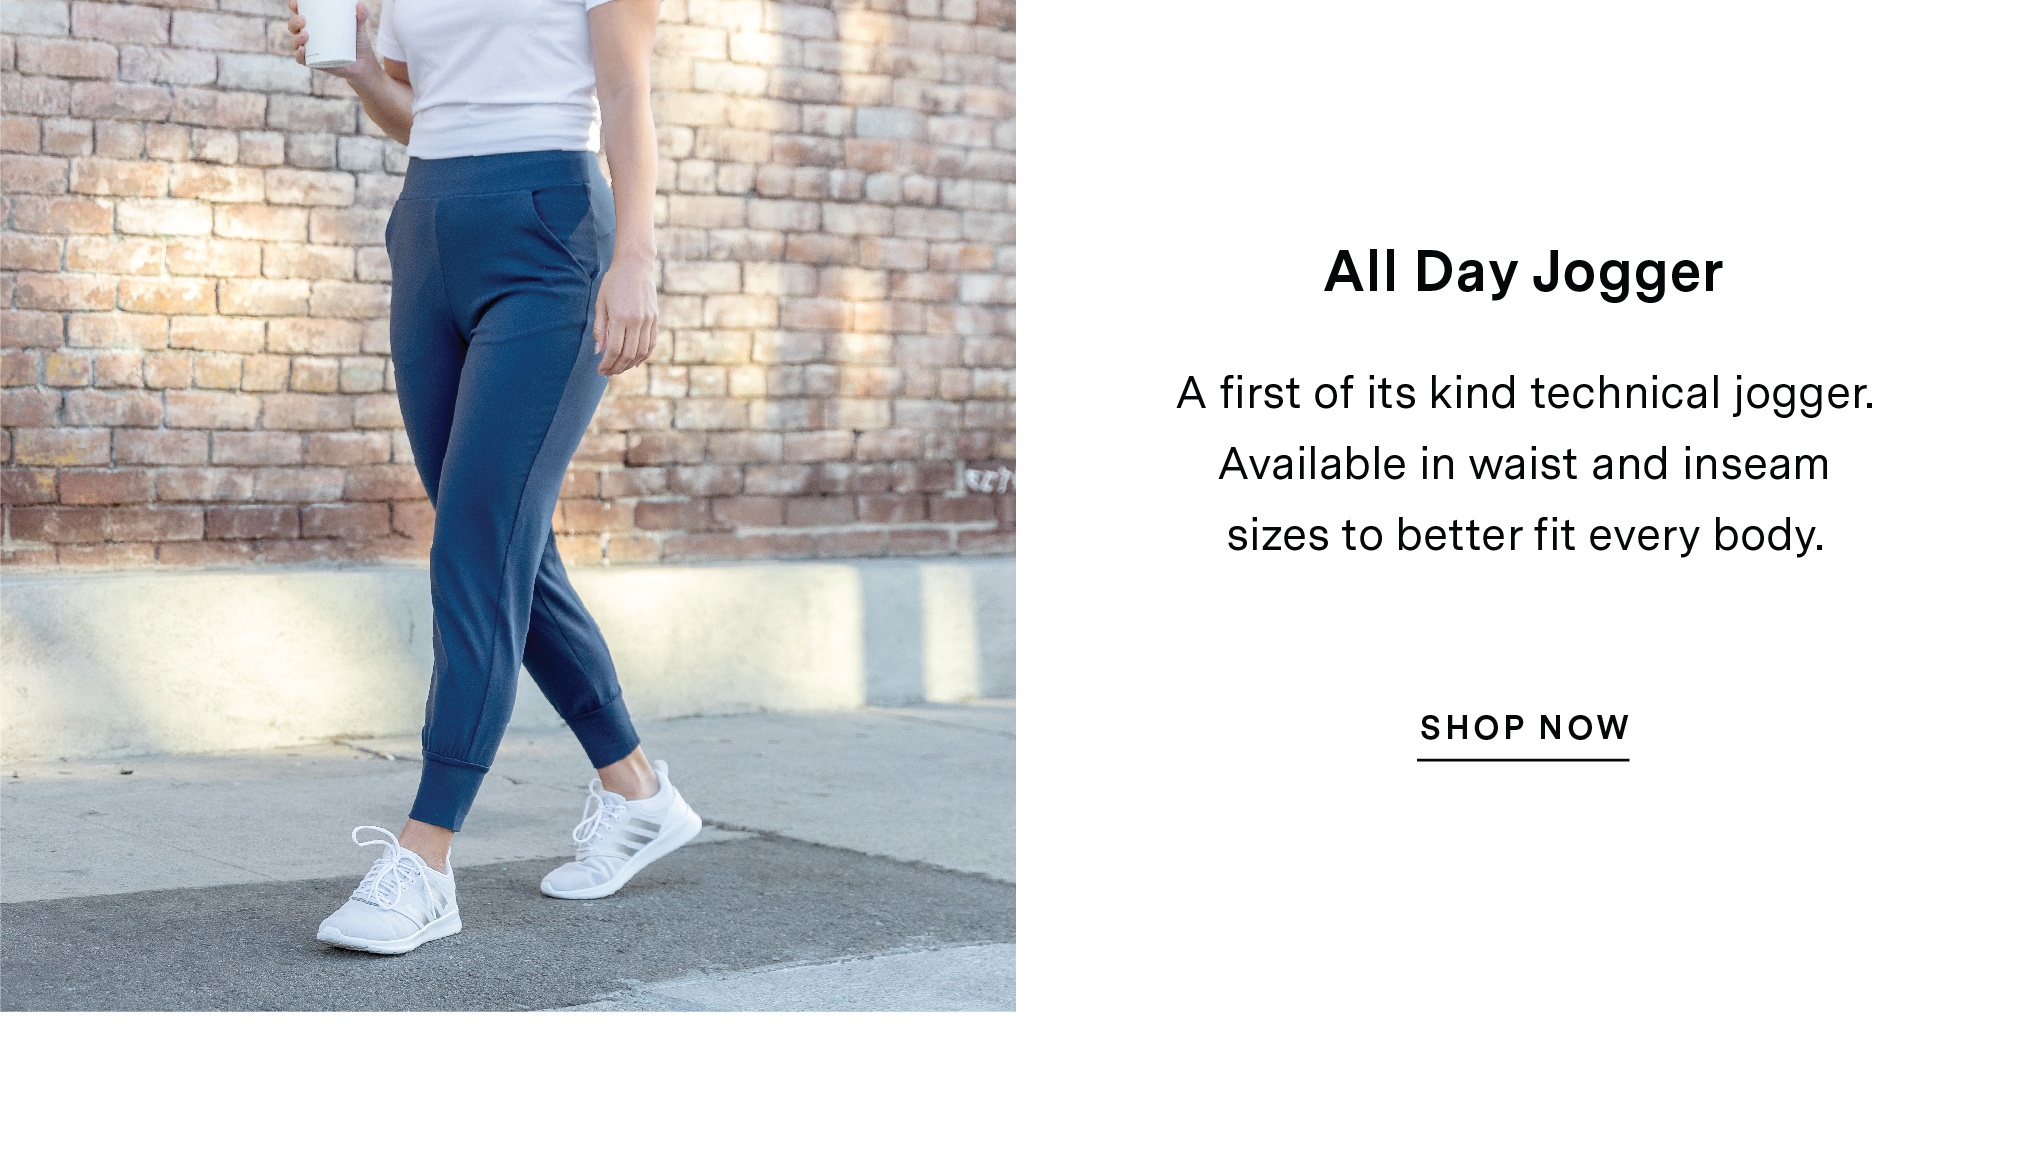 All Day Jogger - A first of its kind technical jogger. Available in waist and inseam sizes to better fit every body. 